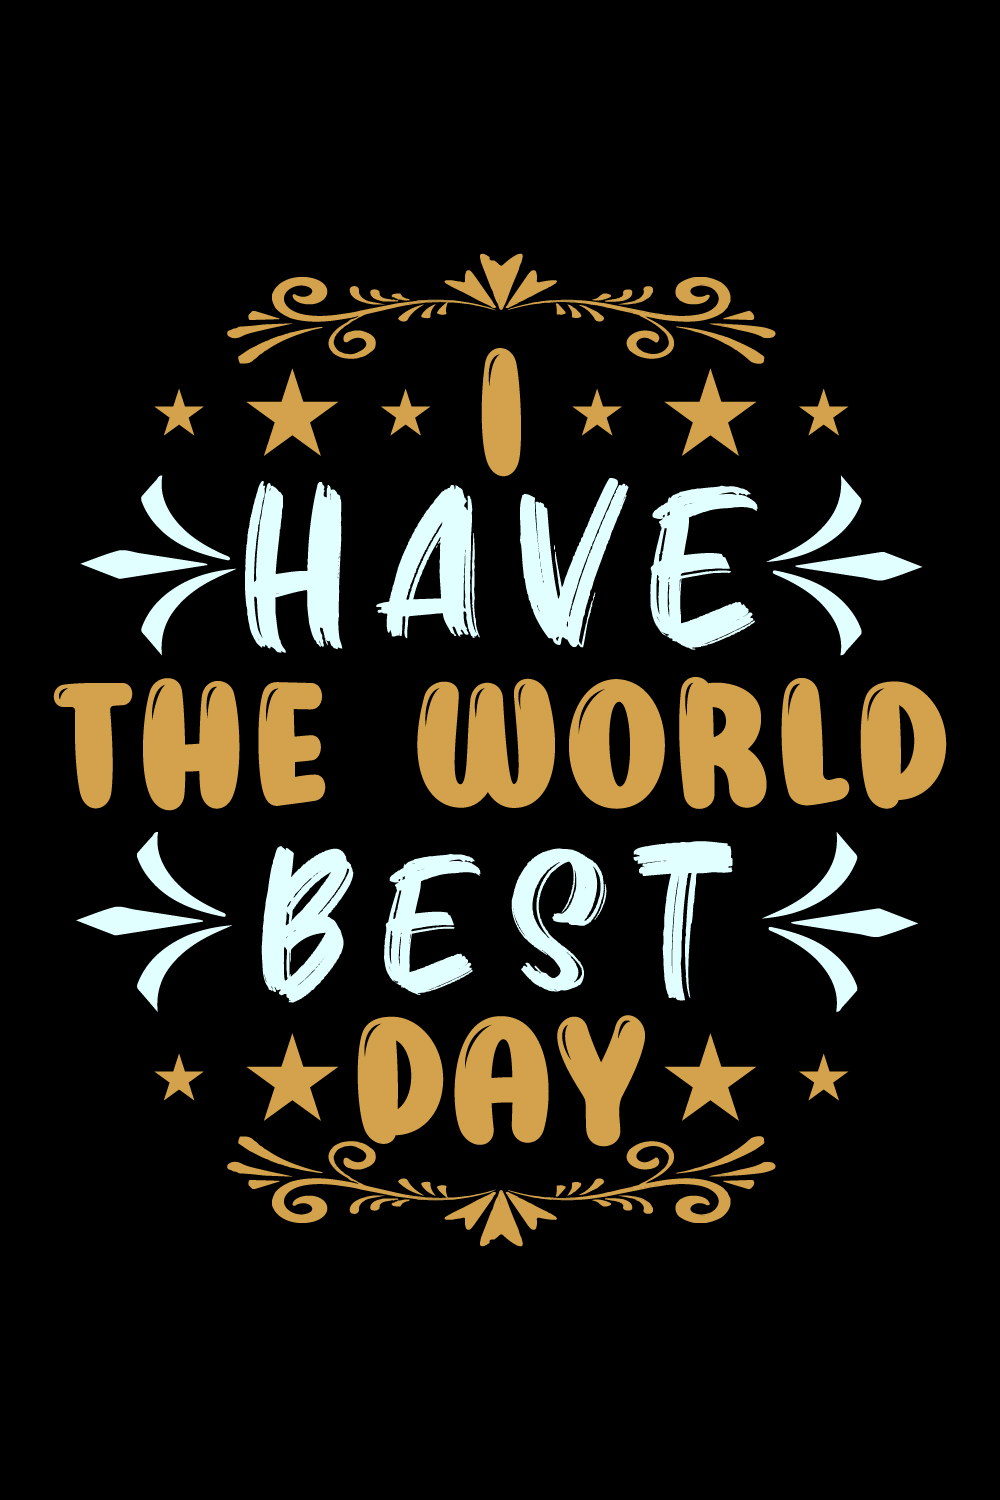 The world best day t shirt pinterest preview image.